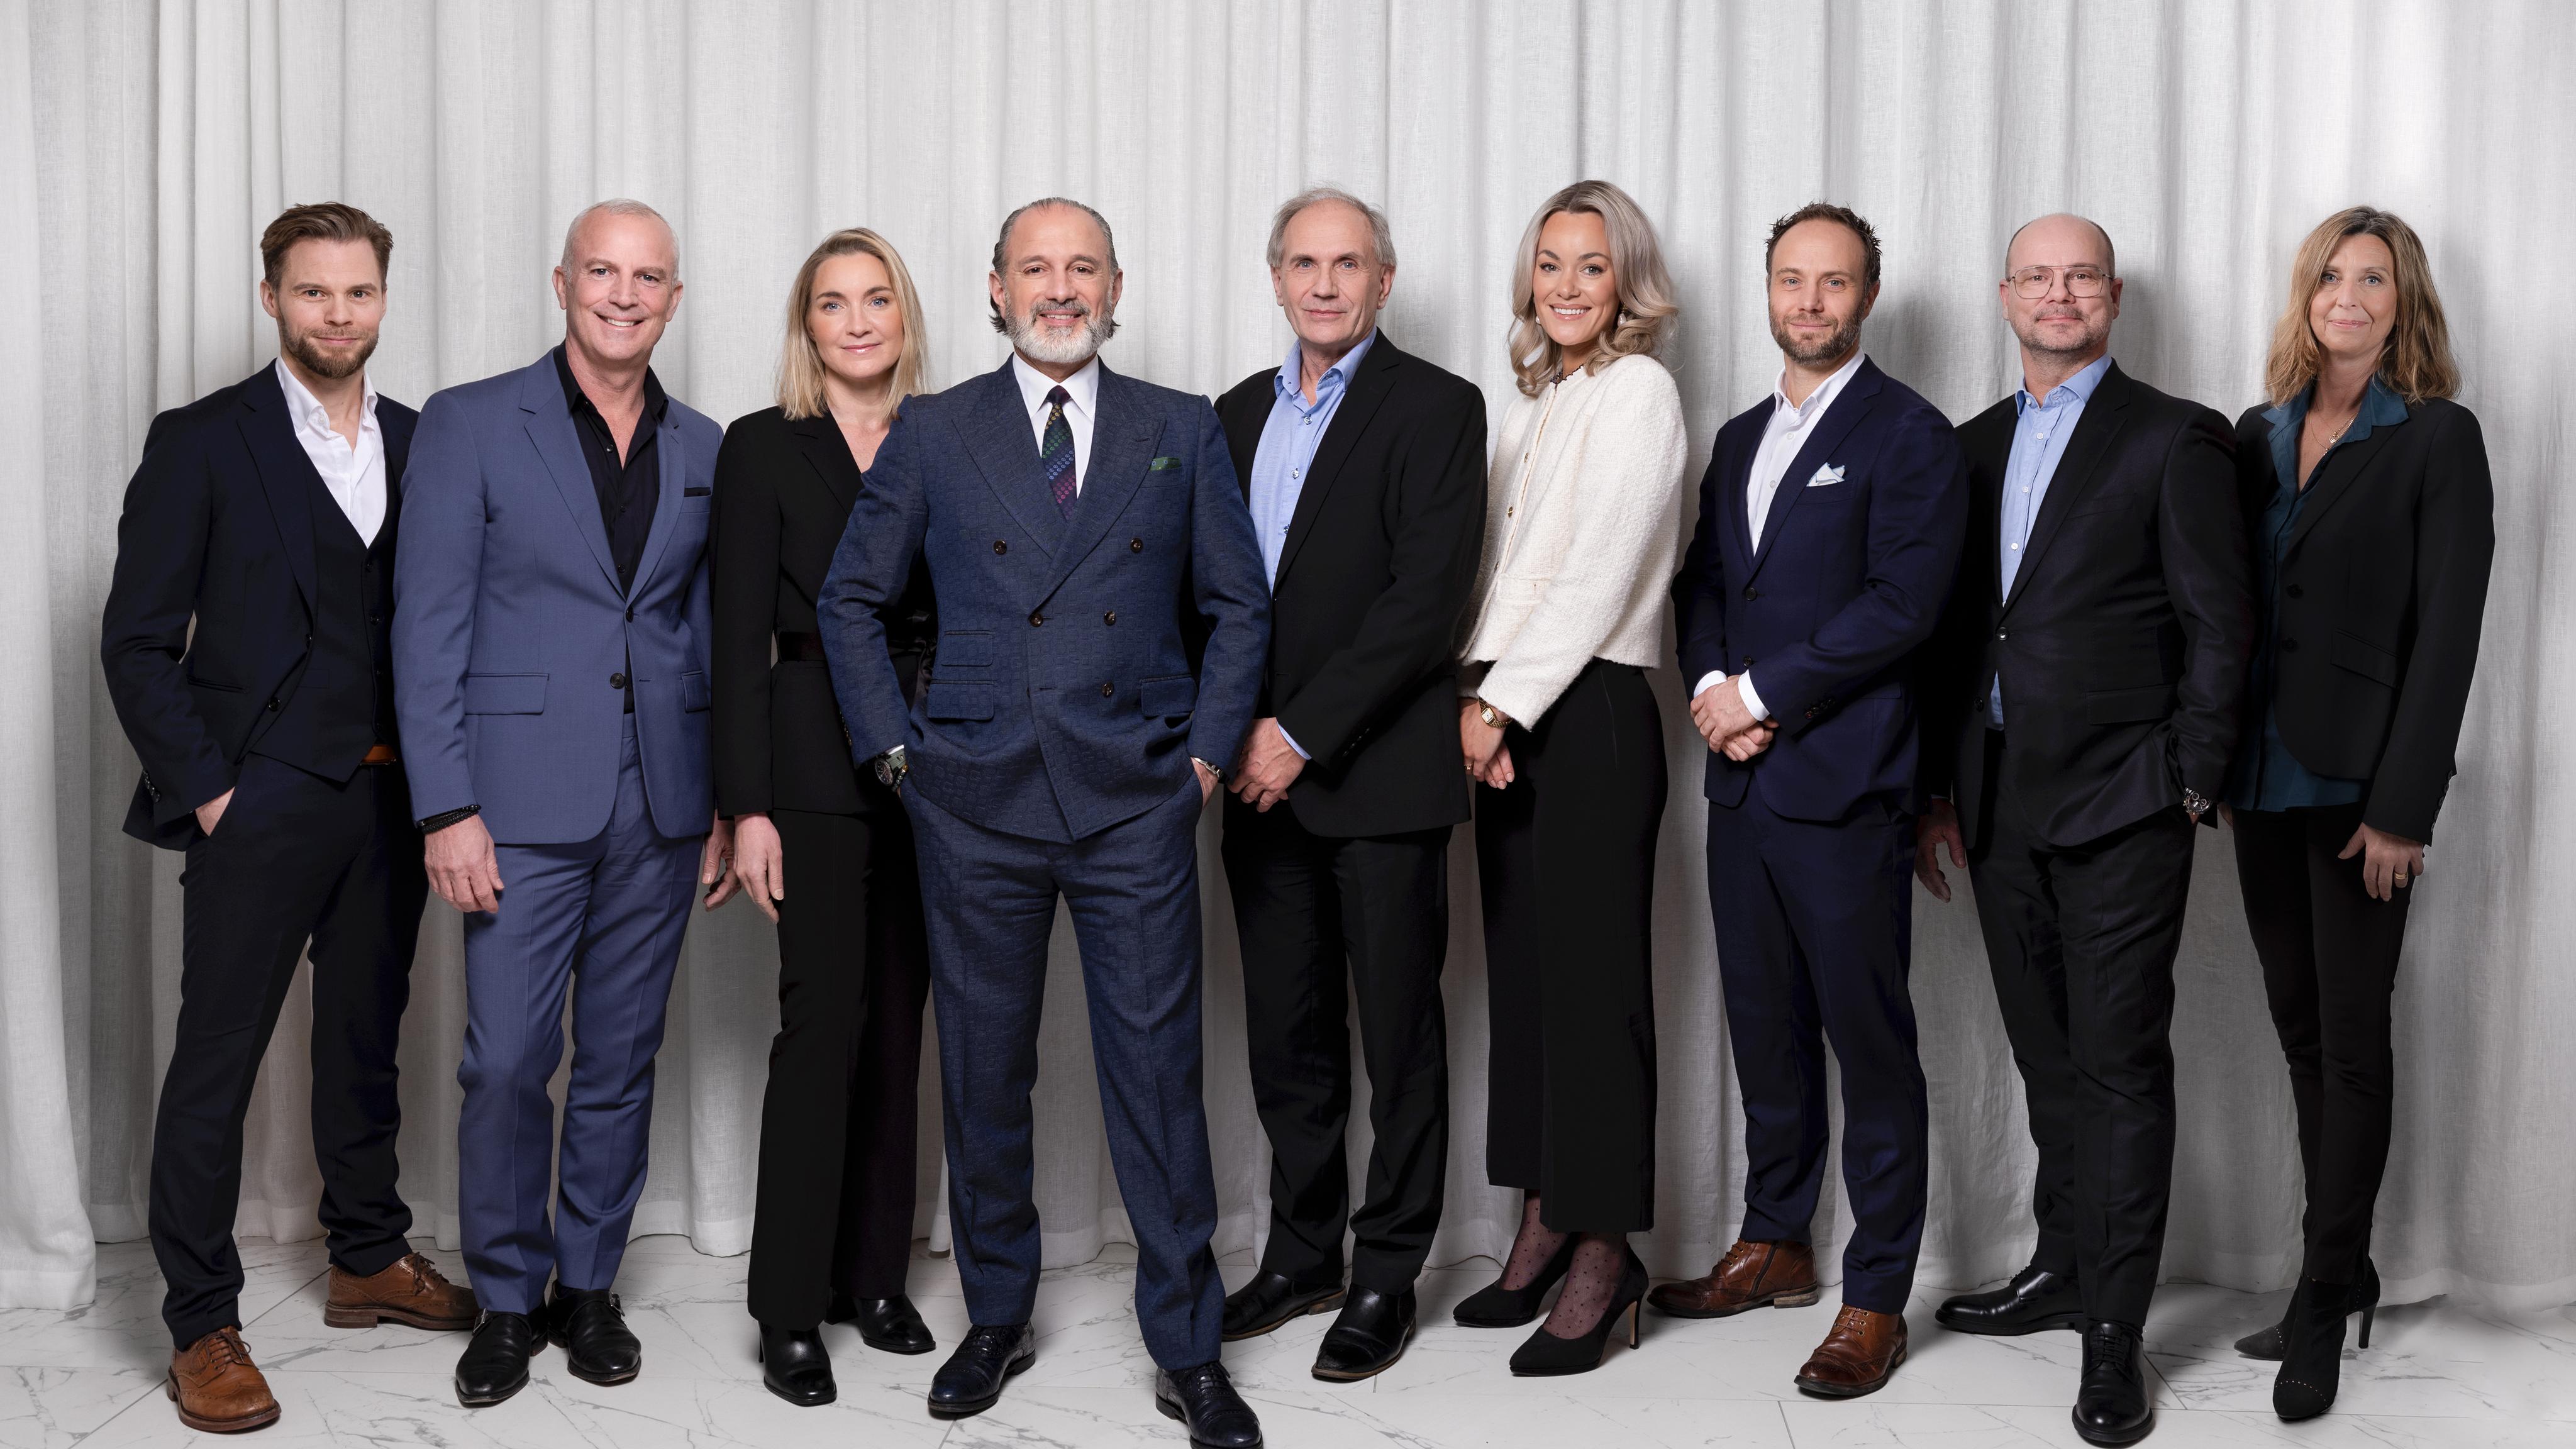 Introducing Åhlén’s new management group – here are the names